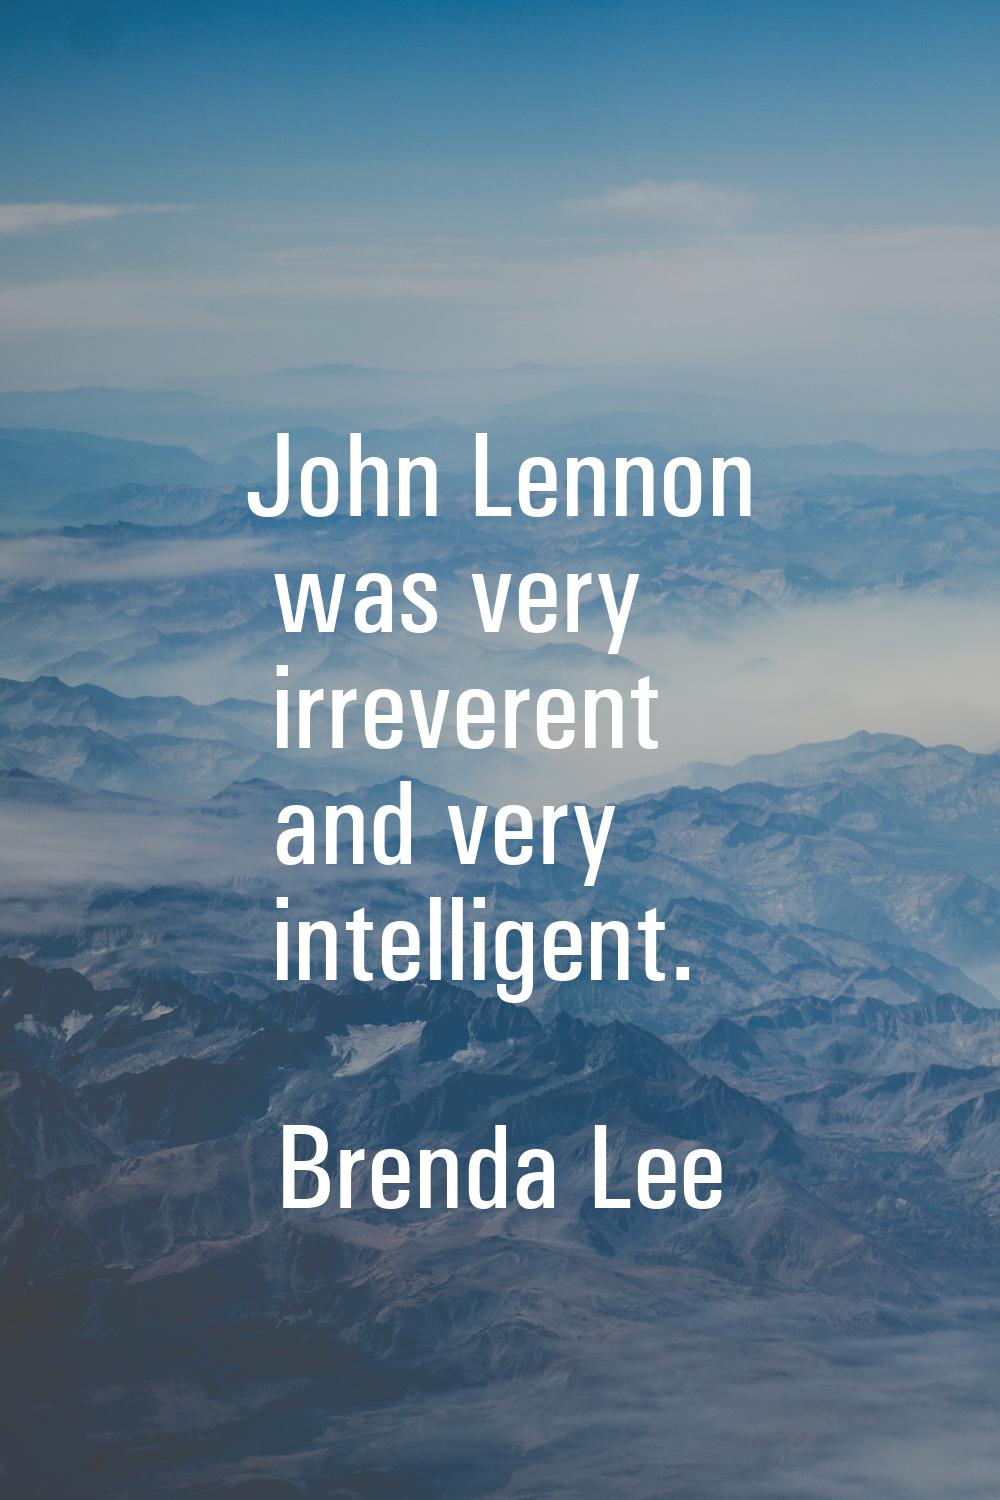 John Lennon was very irreverent and very intelligent.